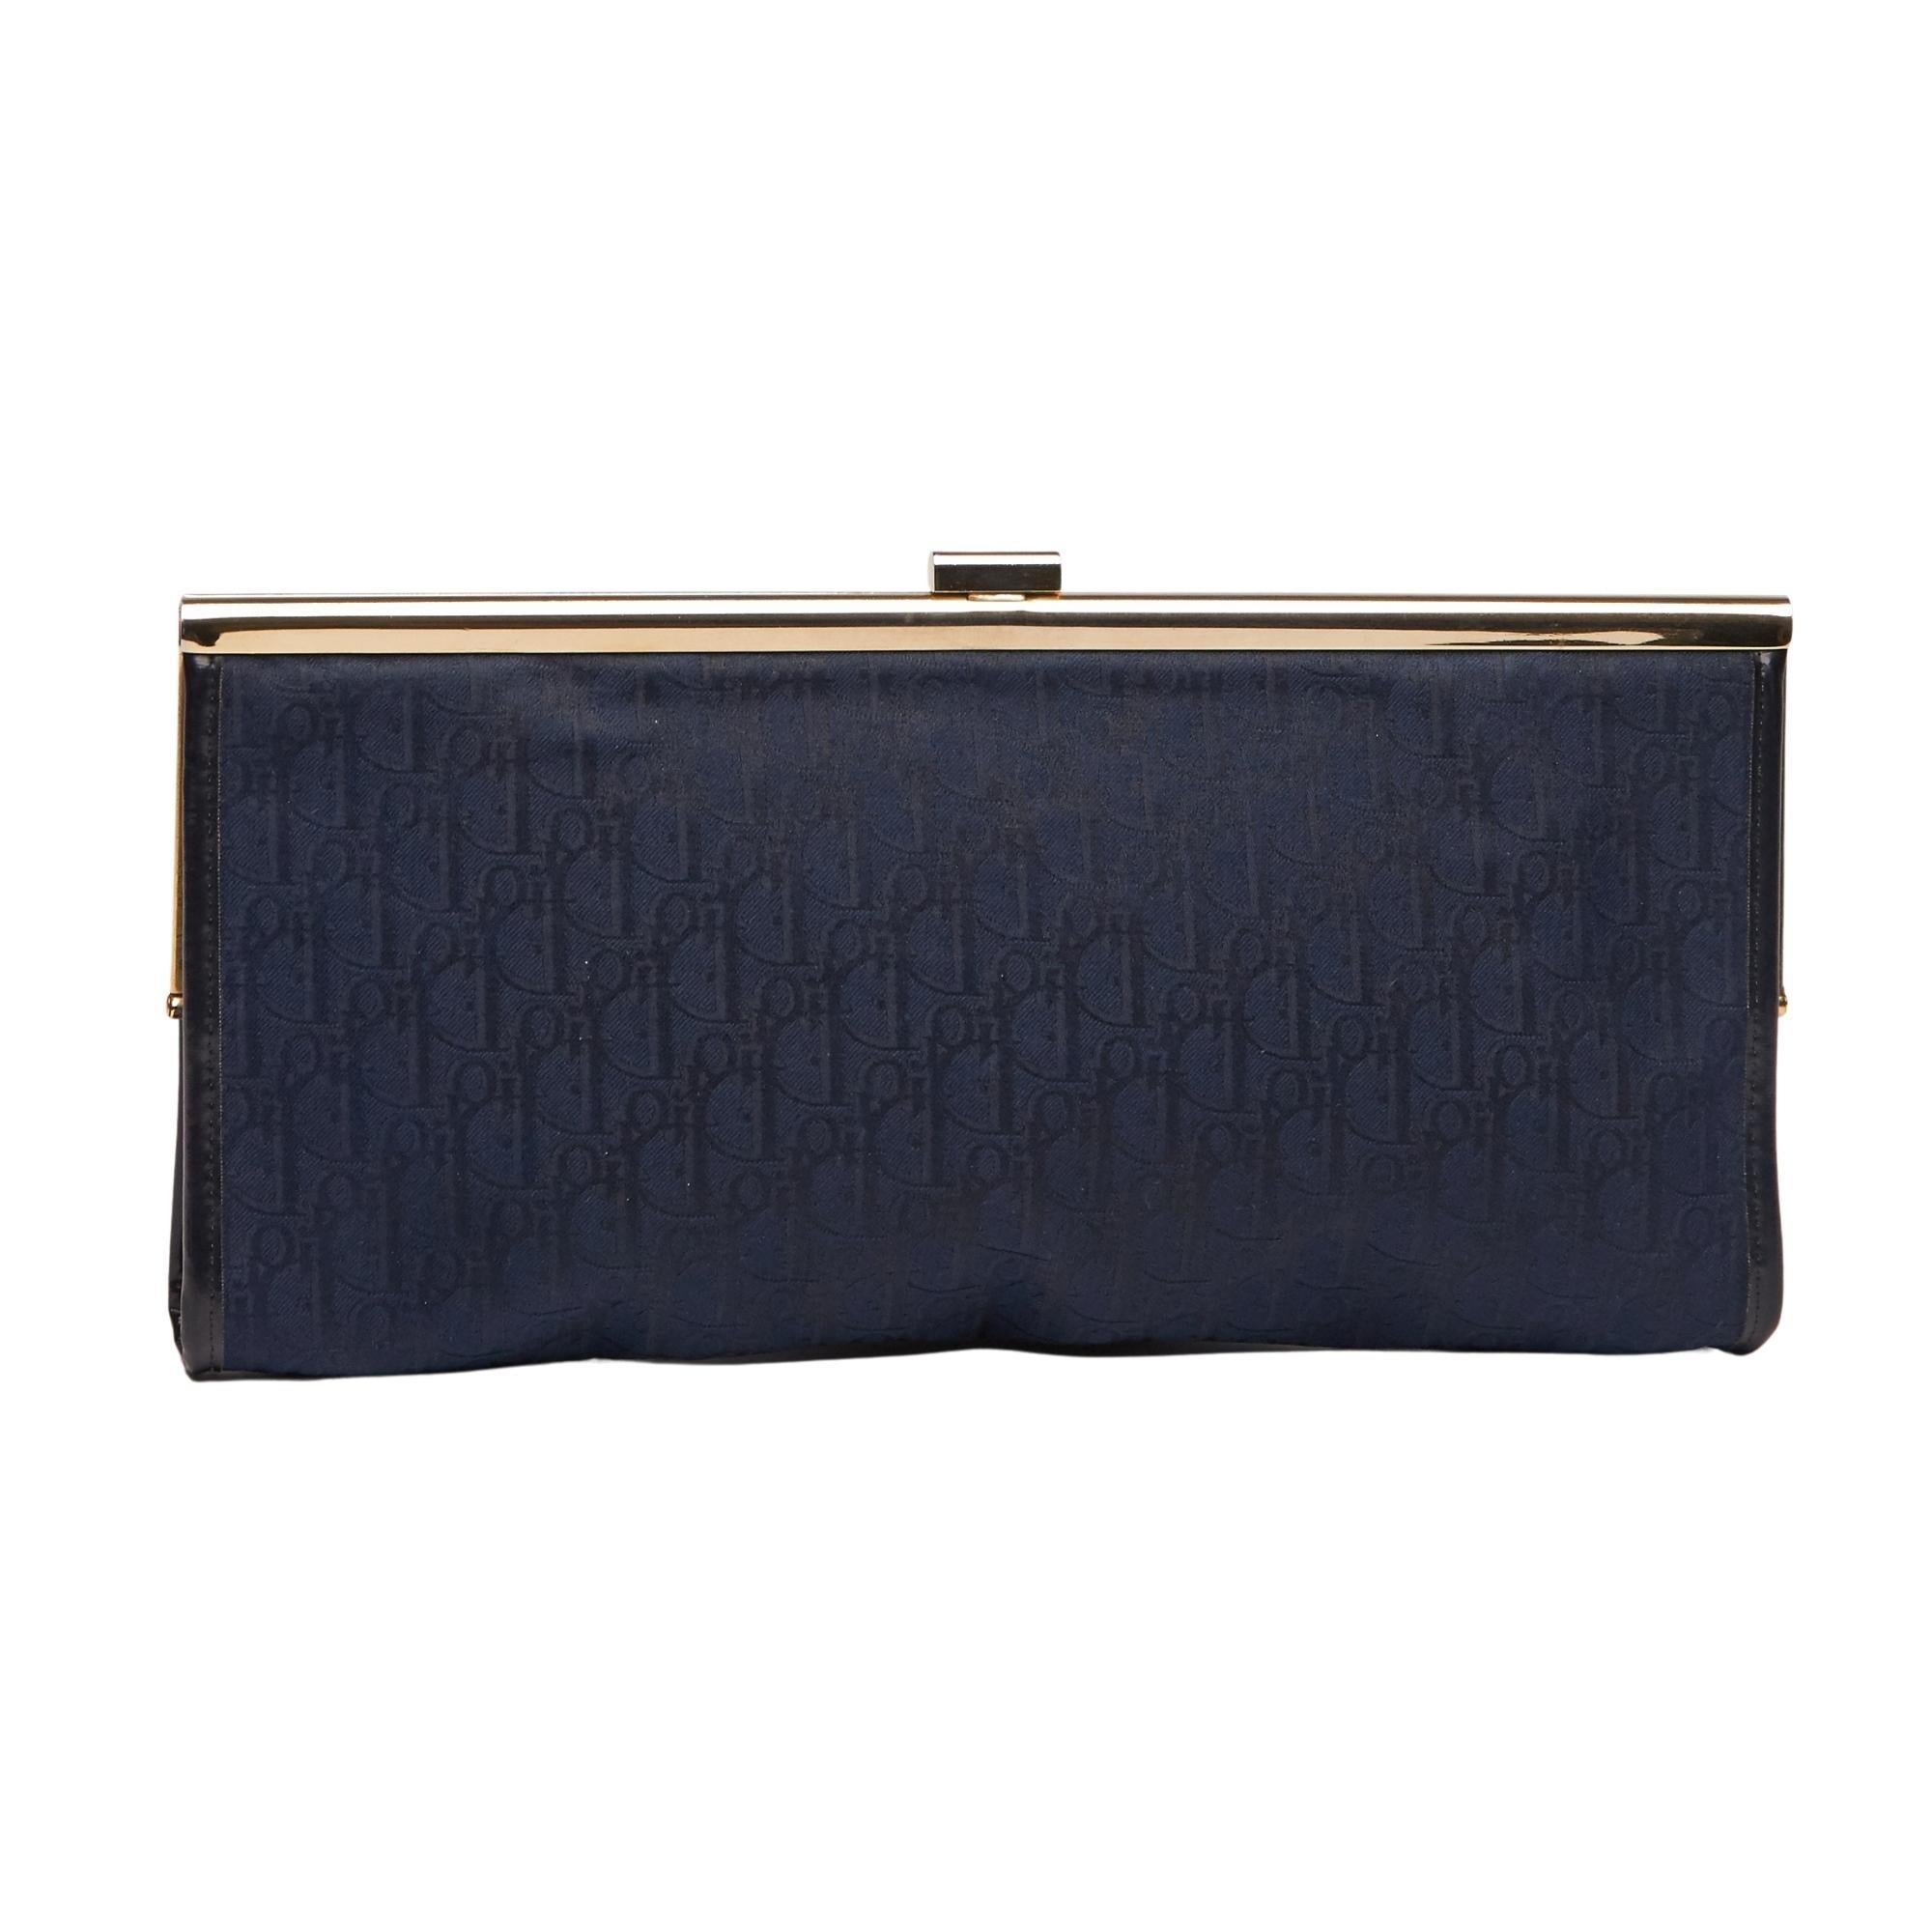 COLOR: Navy
MATERIAL: Canvas
MEASURES: H 5.5” x L 11”
CONDITION: Very good - faint marks and light signs of use.

Made in France